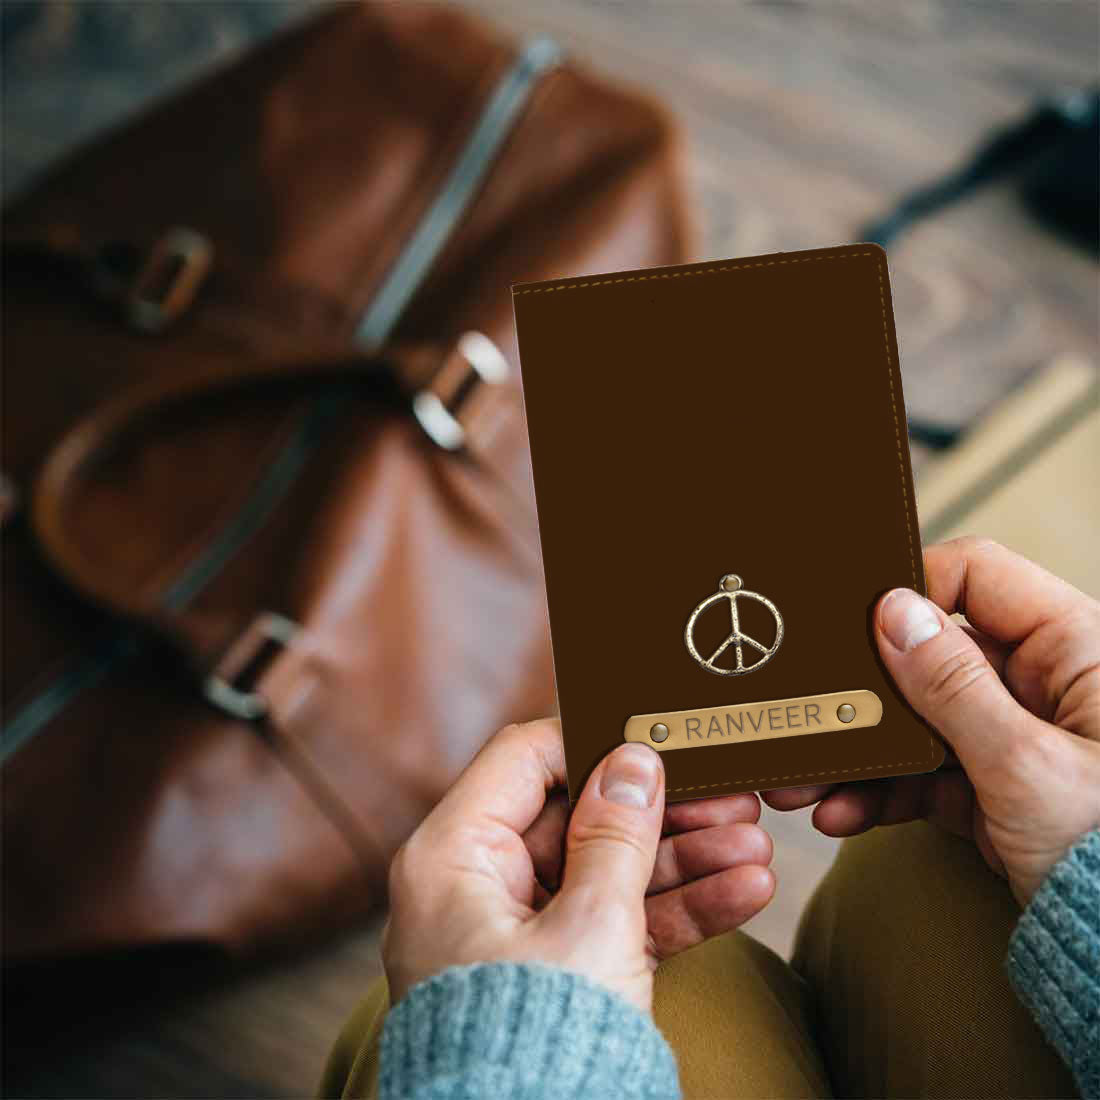 Personalised Travel Document Holder Passport Added Charm - Peace Sign